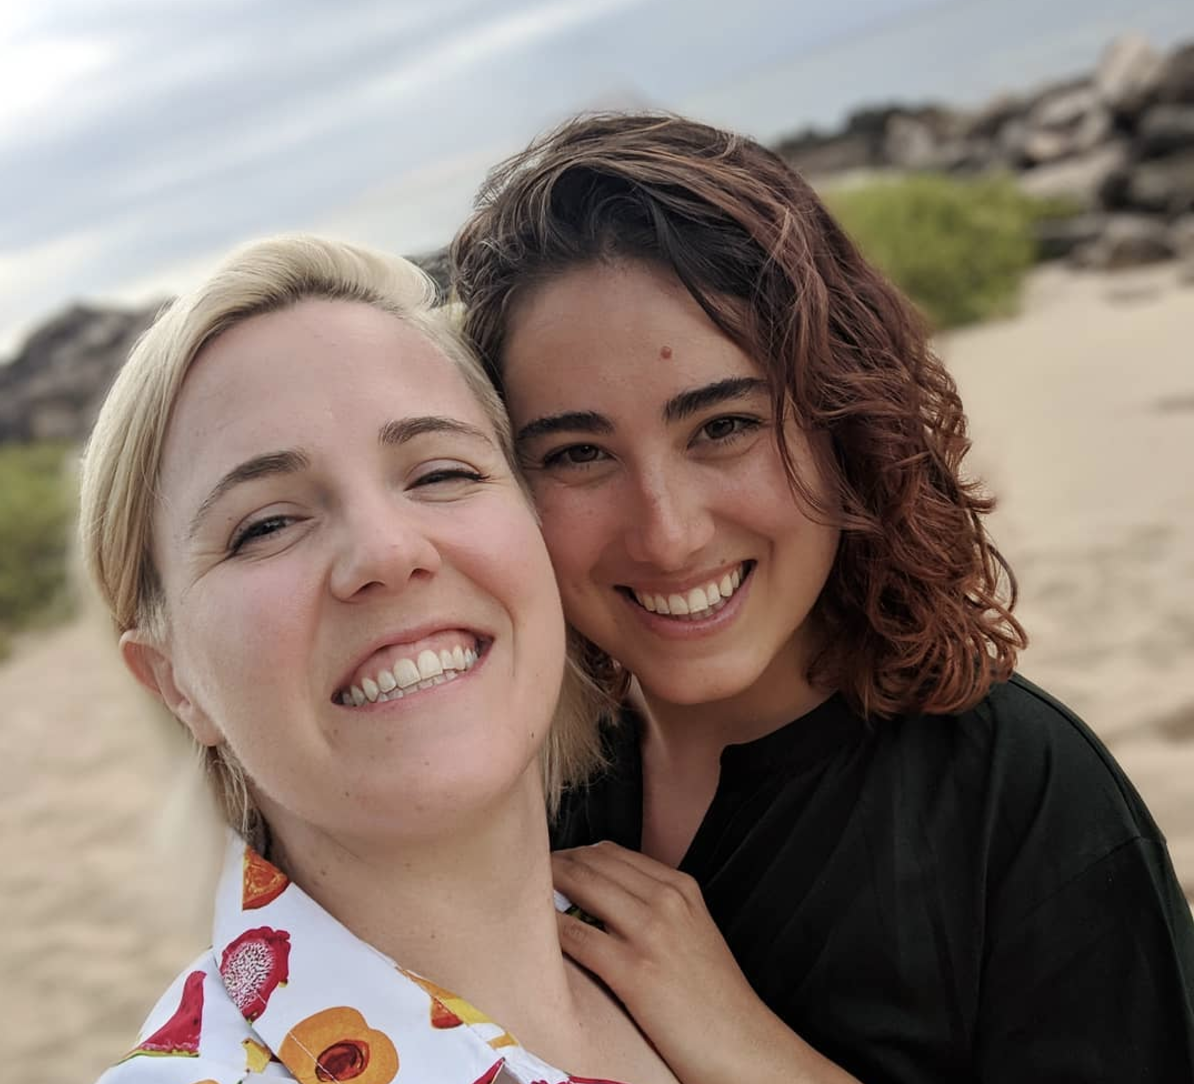 Hannah Hart of 'My Drunk Kitchen' Is Engaged to BuzzFeed Producer ...